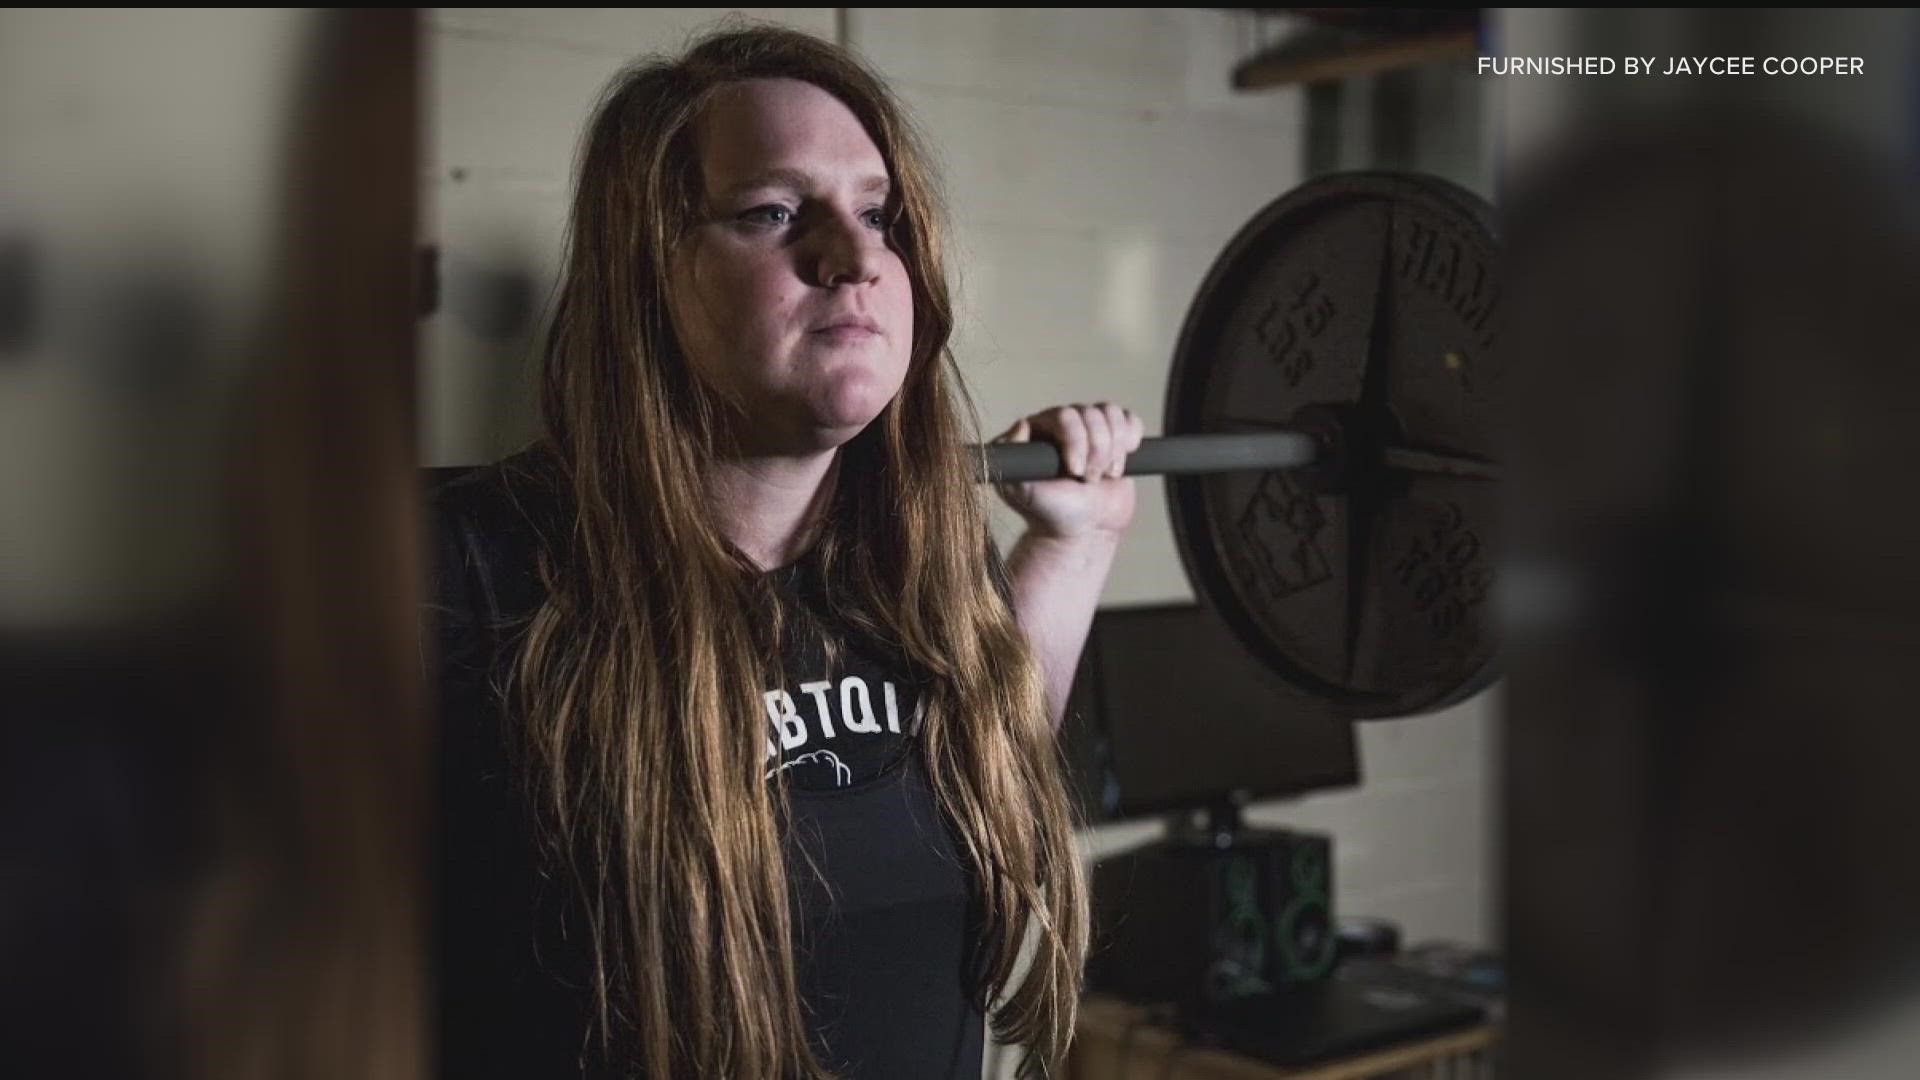 Four years after JayCee Cooper filed a lawsuit against USA Powerlifting, a Minnesota court ruled the organization must end any unfair discriminatory practices.